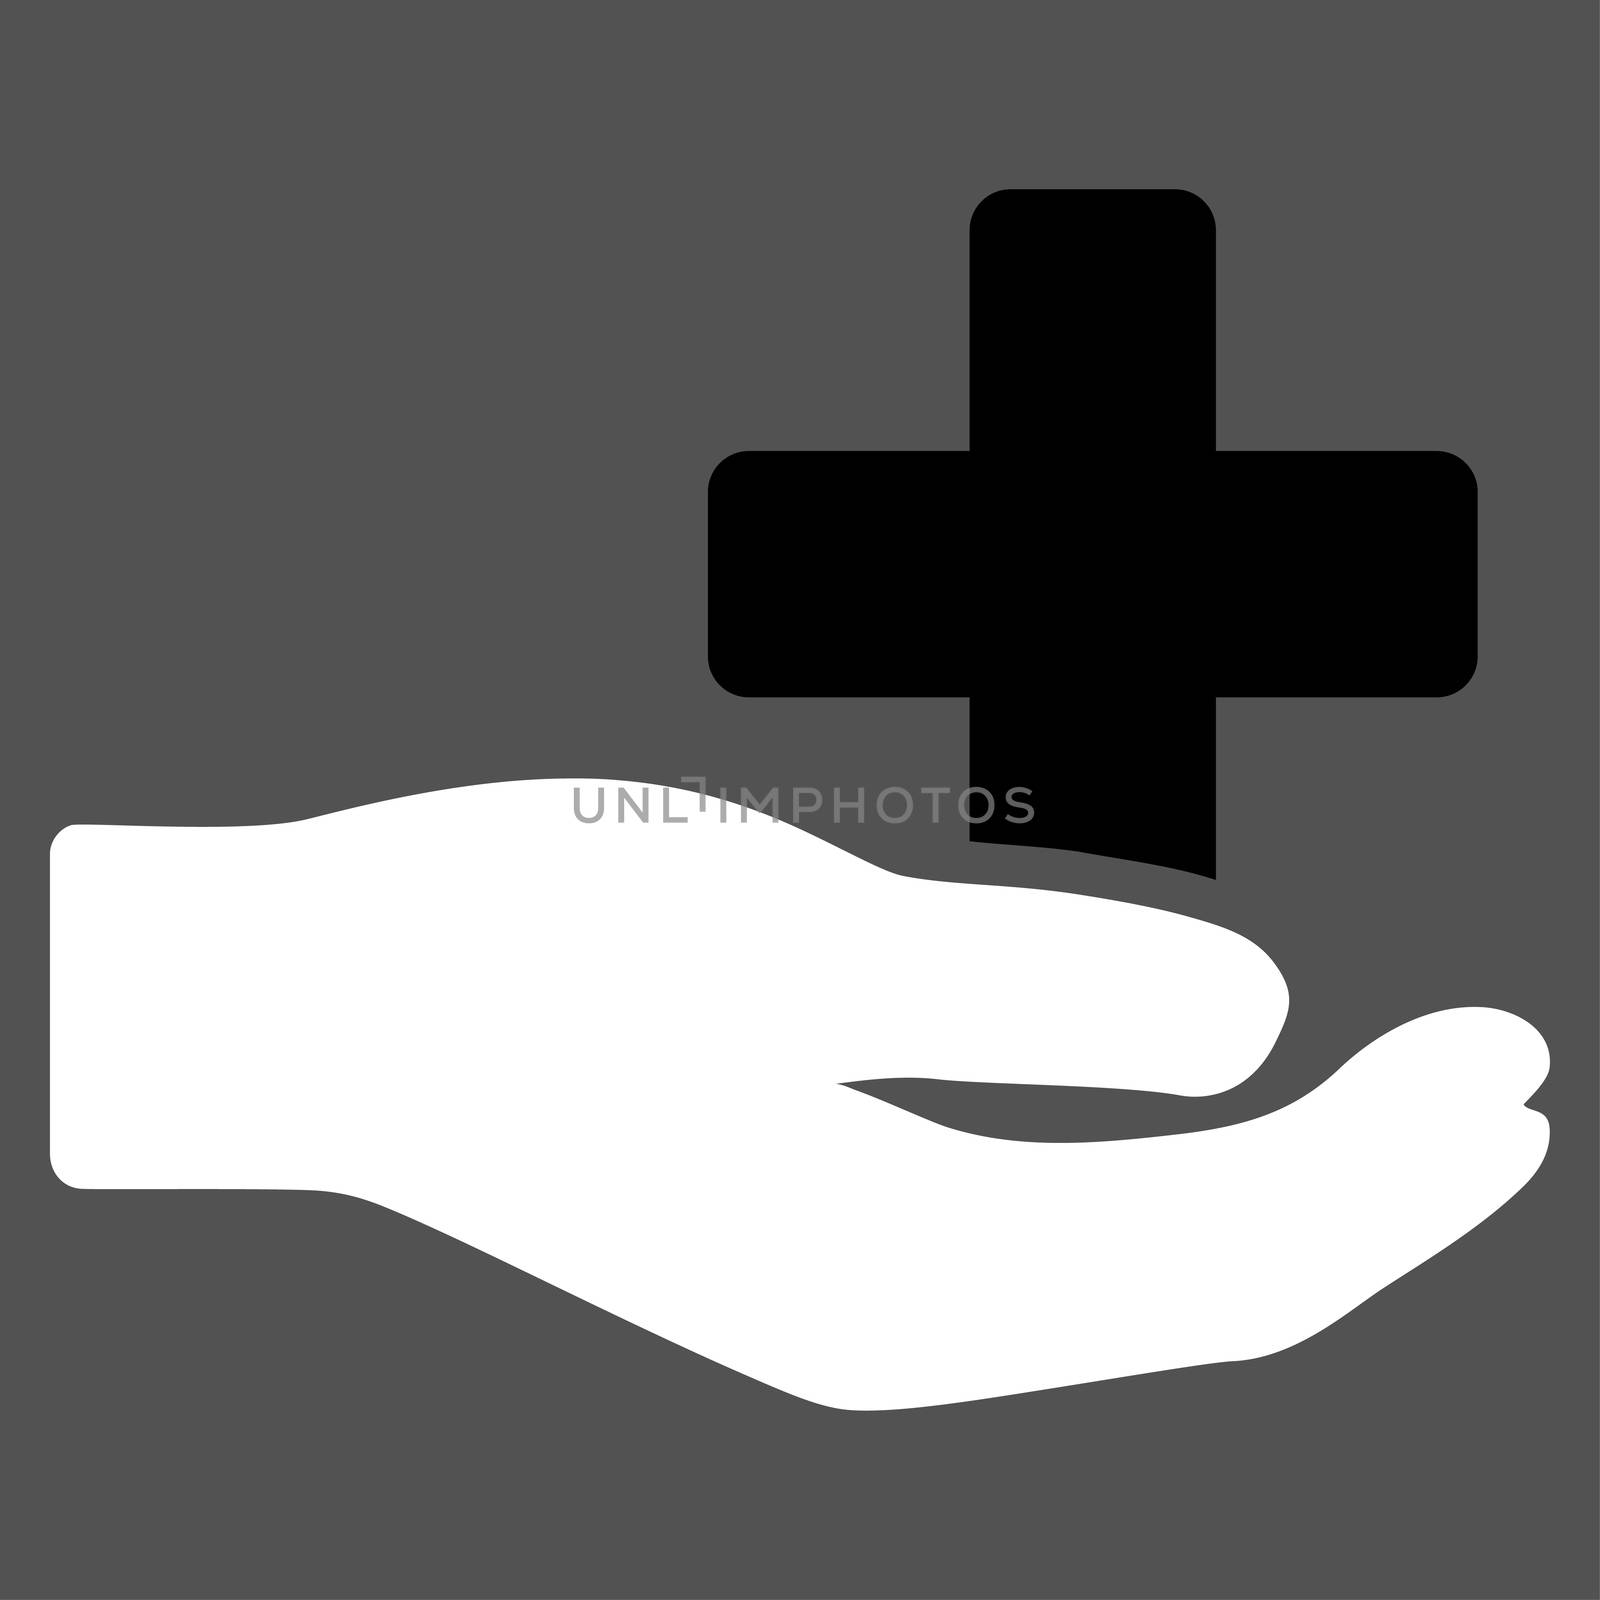 Health Care Donation raster icon. Style is bicolor flat symbol, black and white colors, rounded angles, gray background.